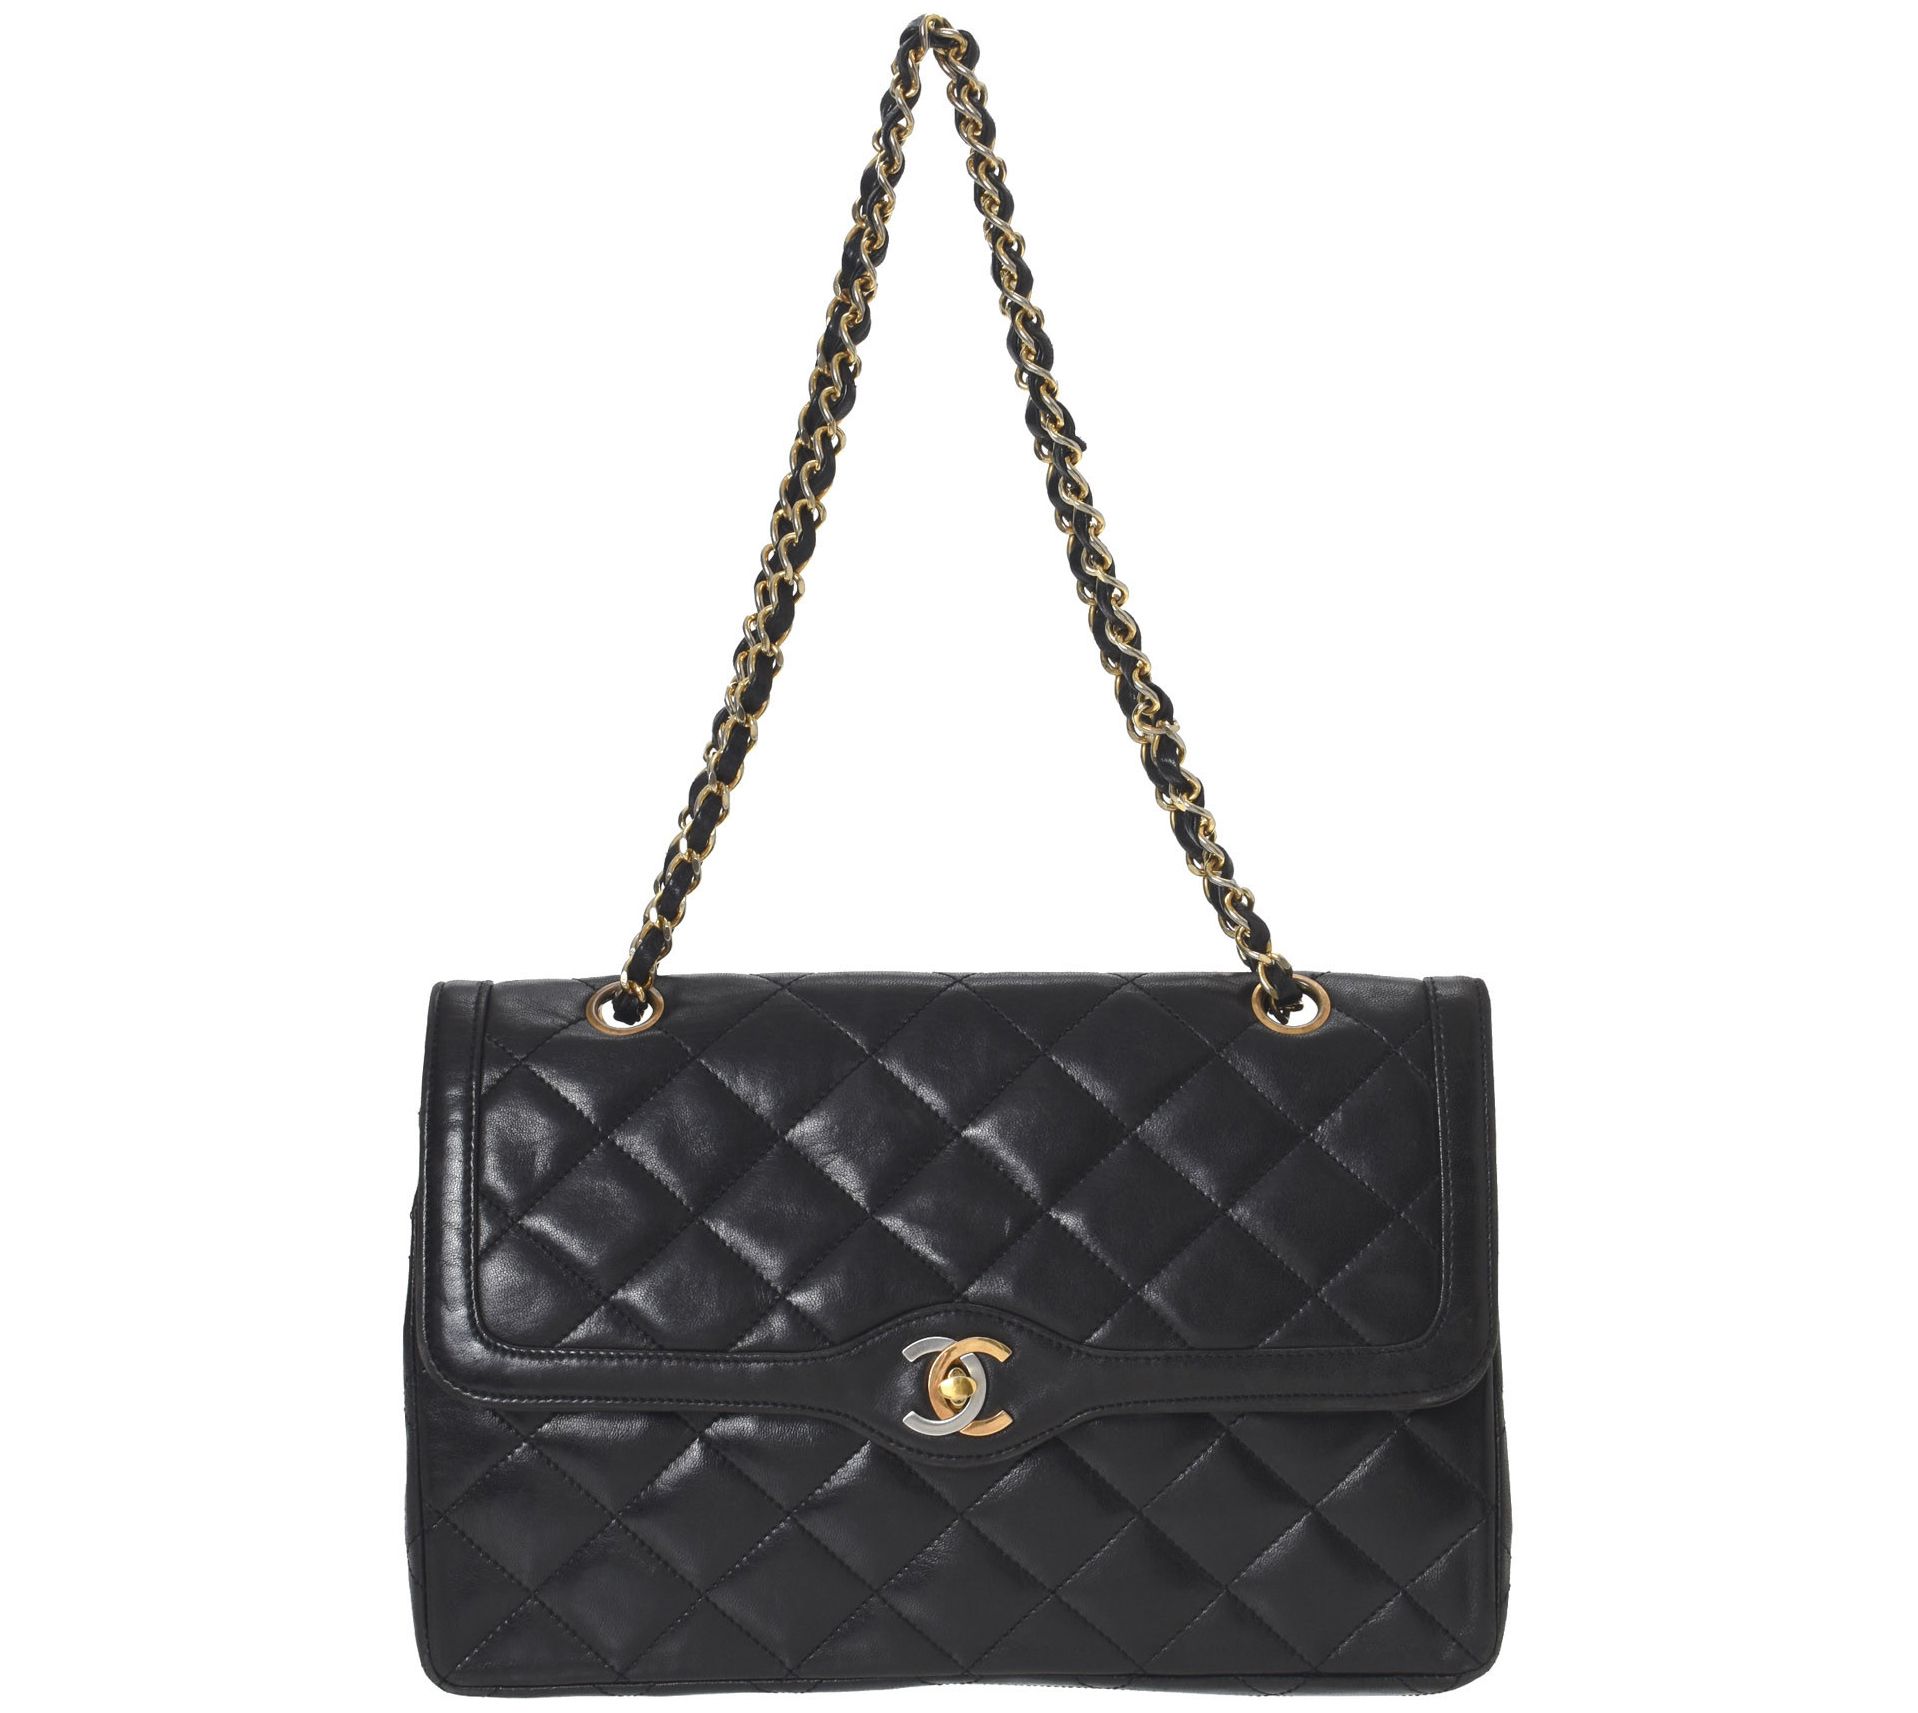 Pre-Owned Chanel Paris Limited Edition Double F lap Bag